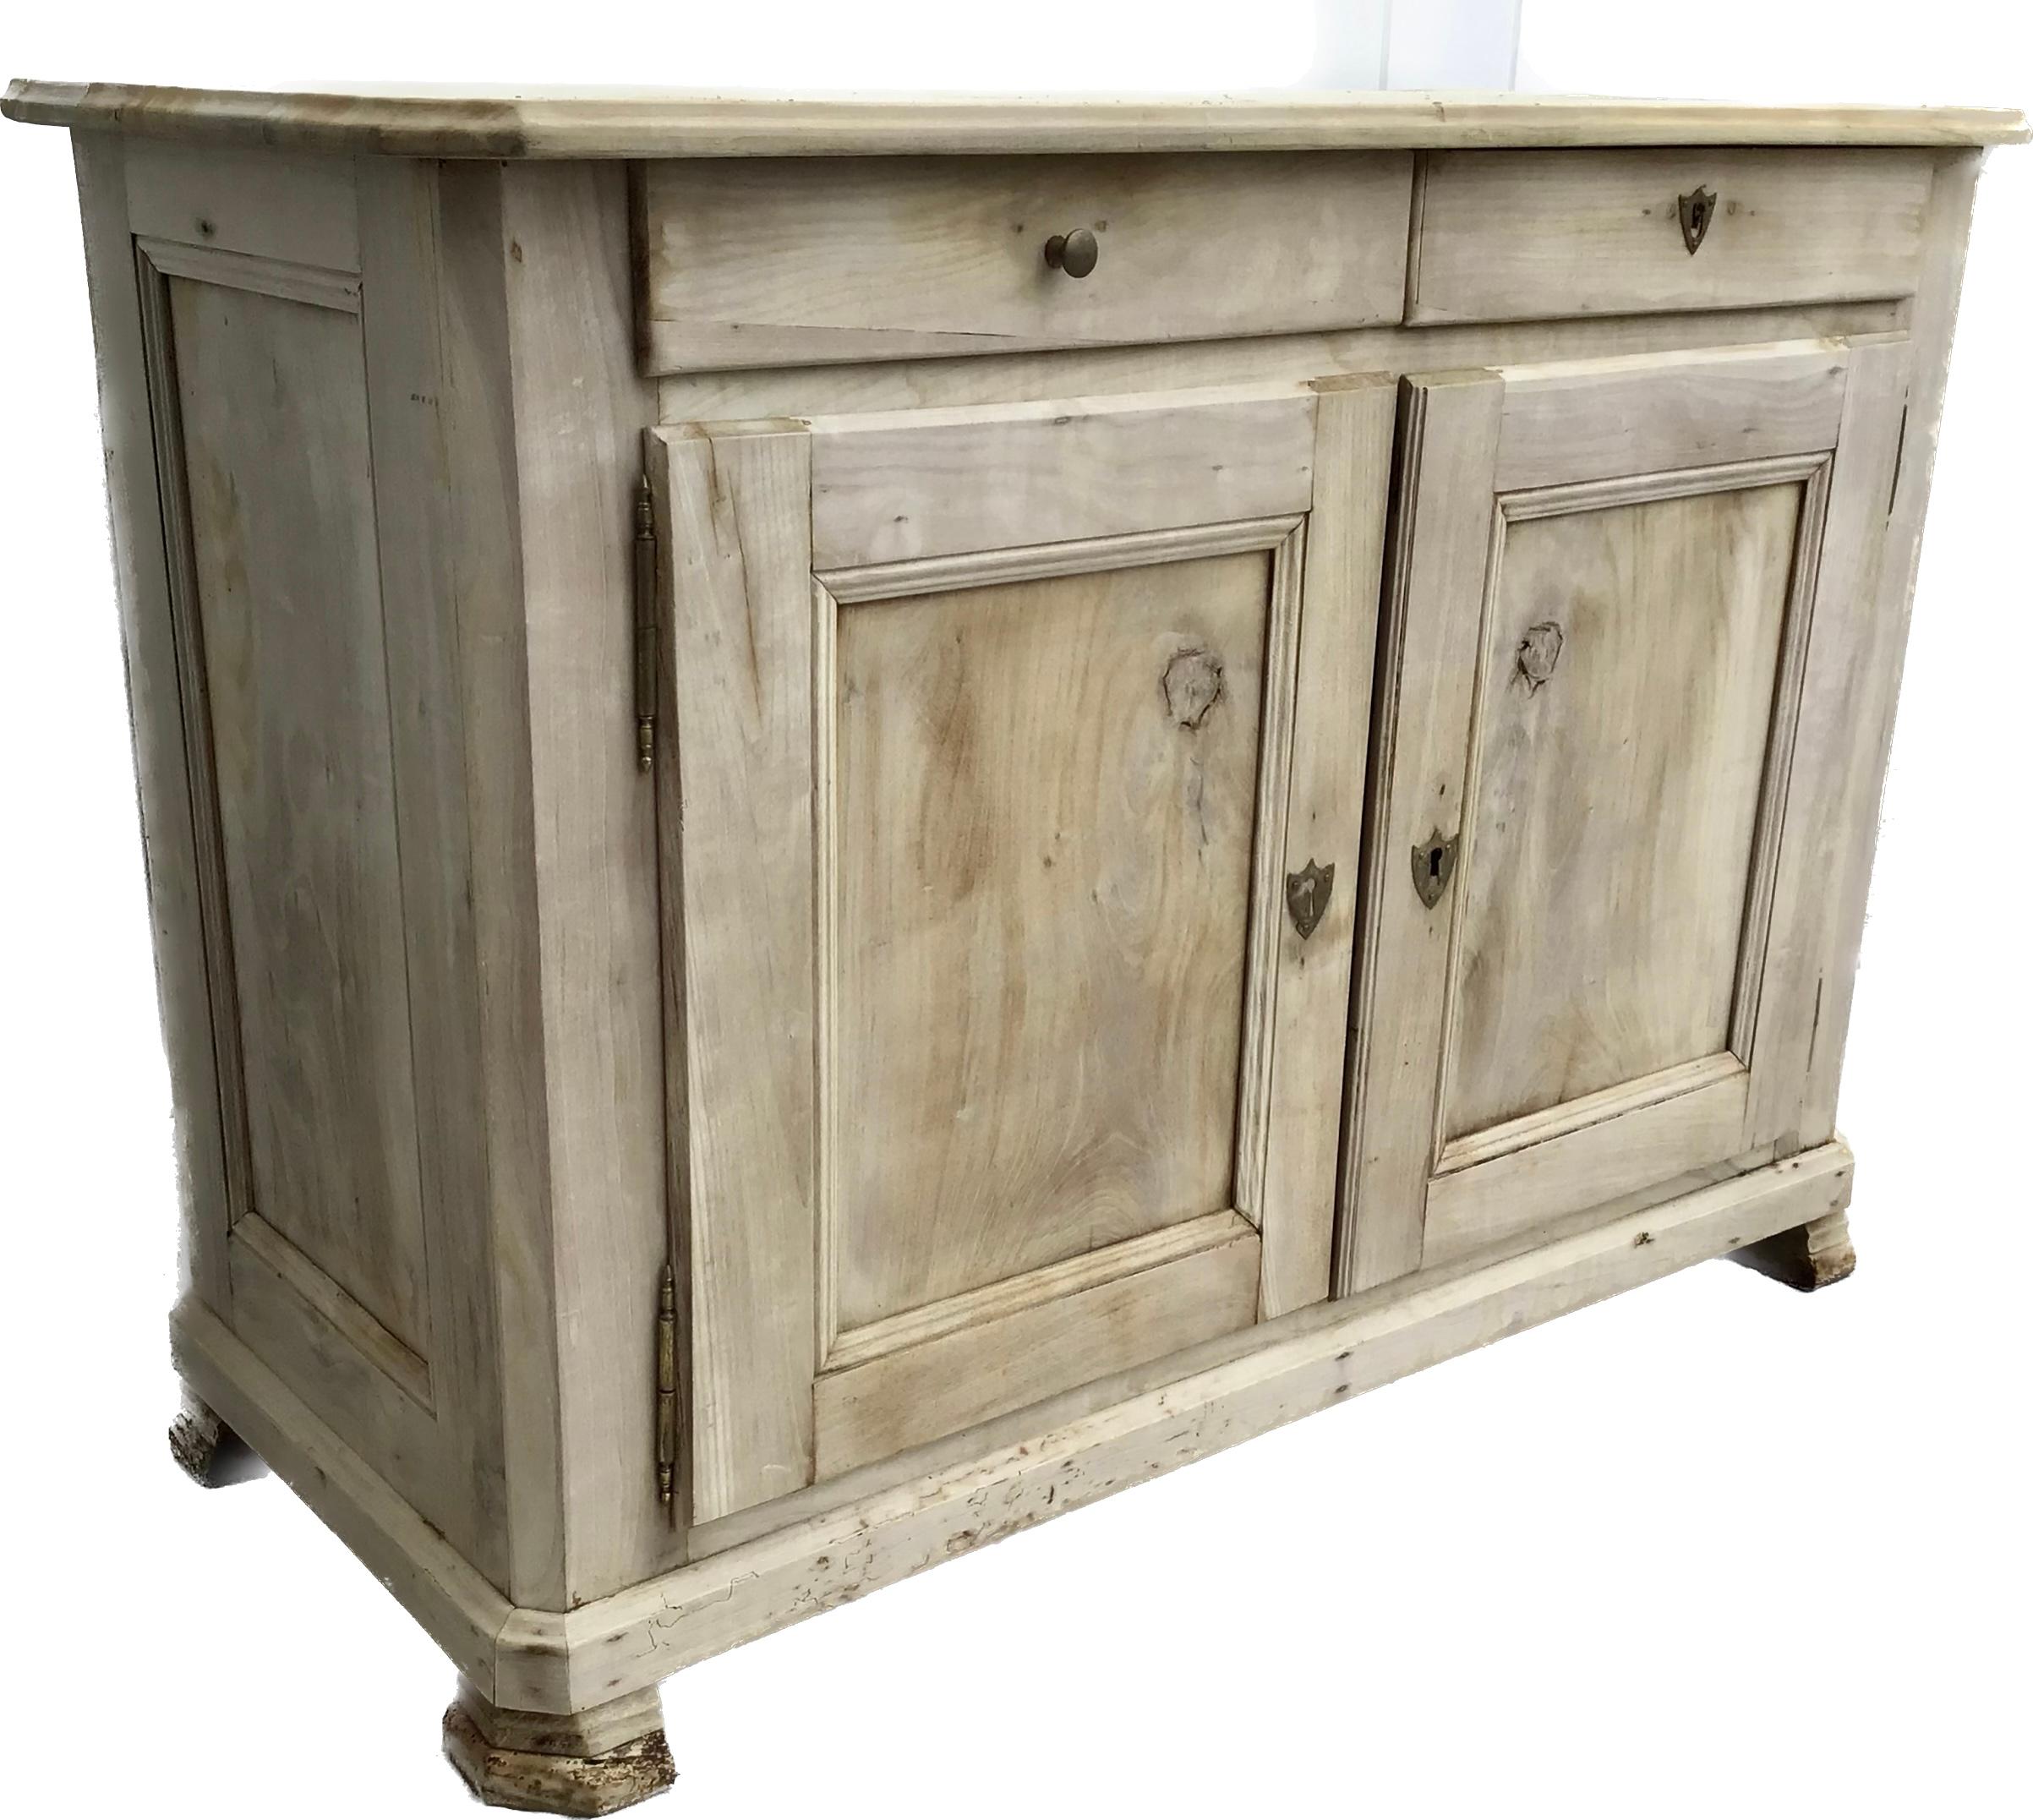 French buffet Louis Phillipe circa 1860. Beautiful bleached Cherry wood. Natural light warm patina. From France. Made of beautifully colored bleached out wood. Paneled sides. Two molded drawers and two paneled doors. Great proportions. Great patina.